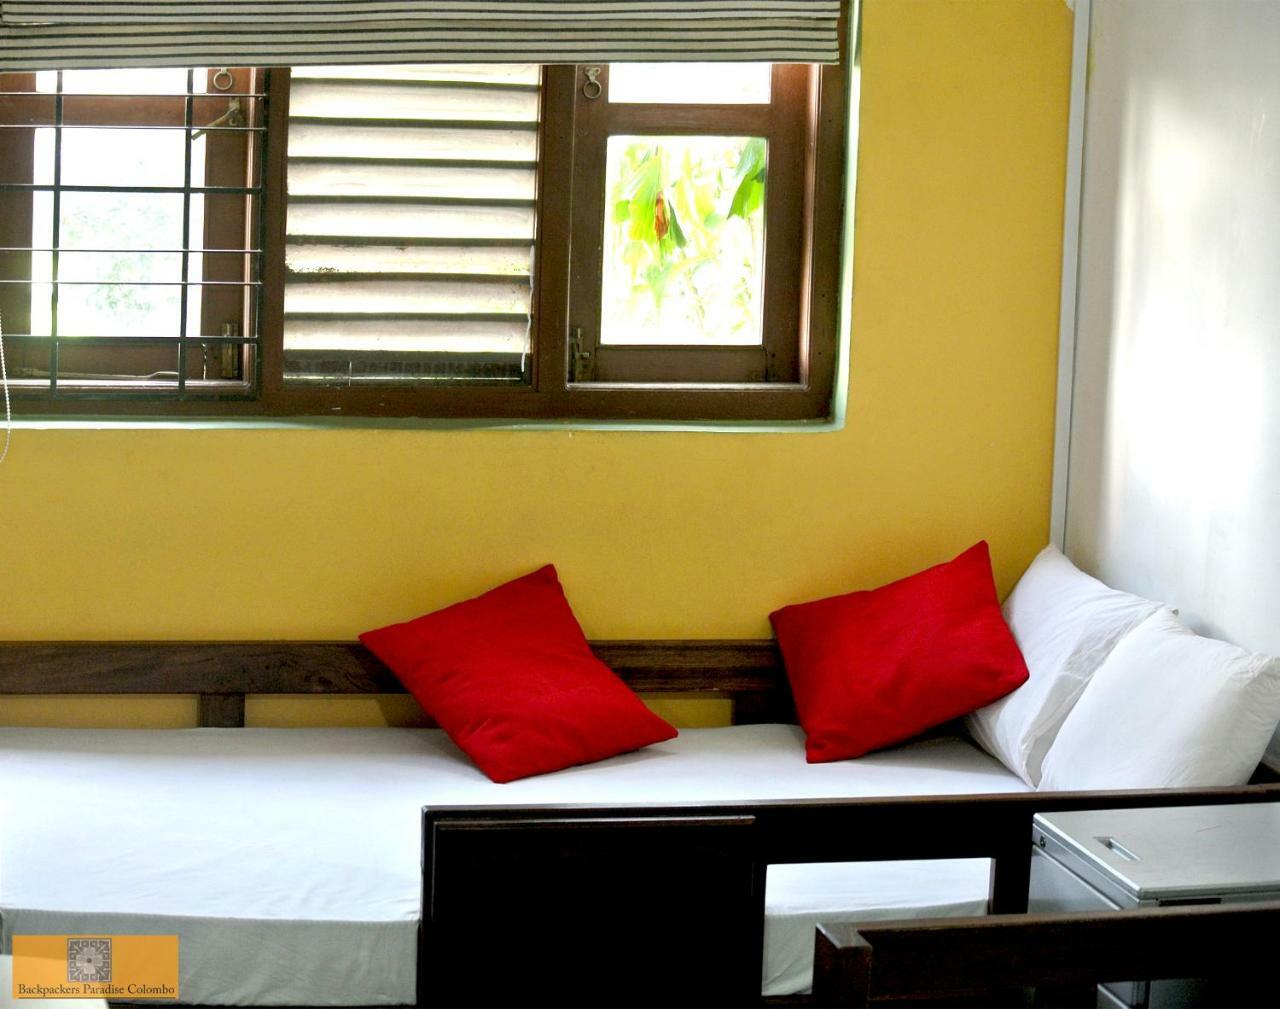 Backpackers Paradise Colombo Exterior photo